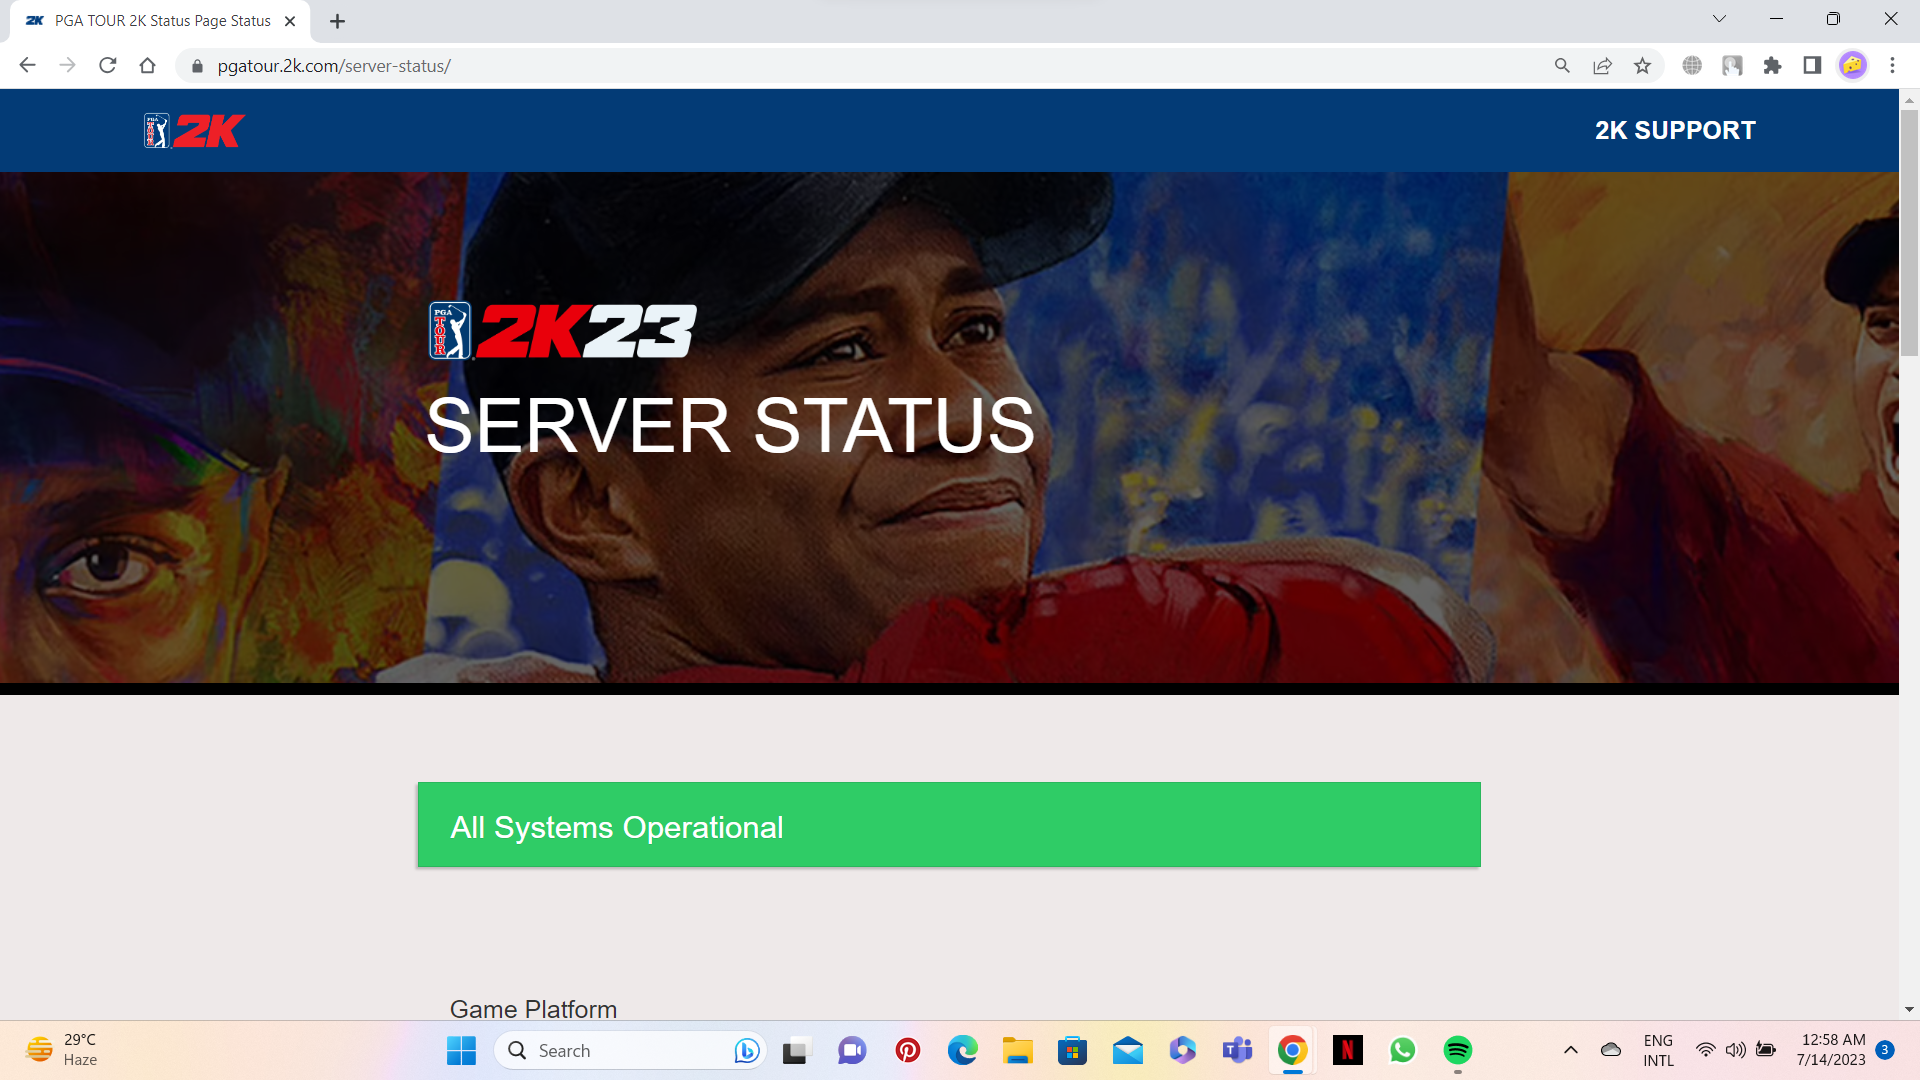 server status of the game